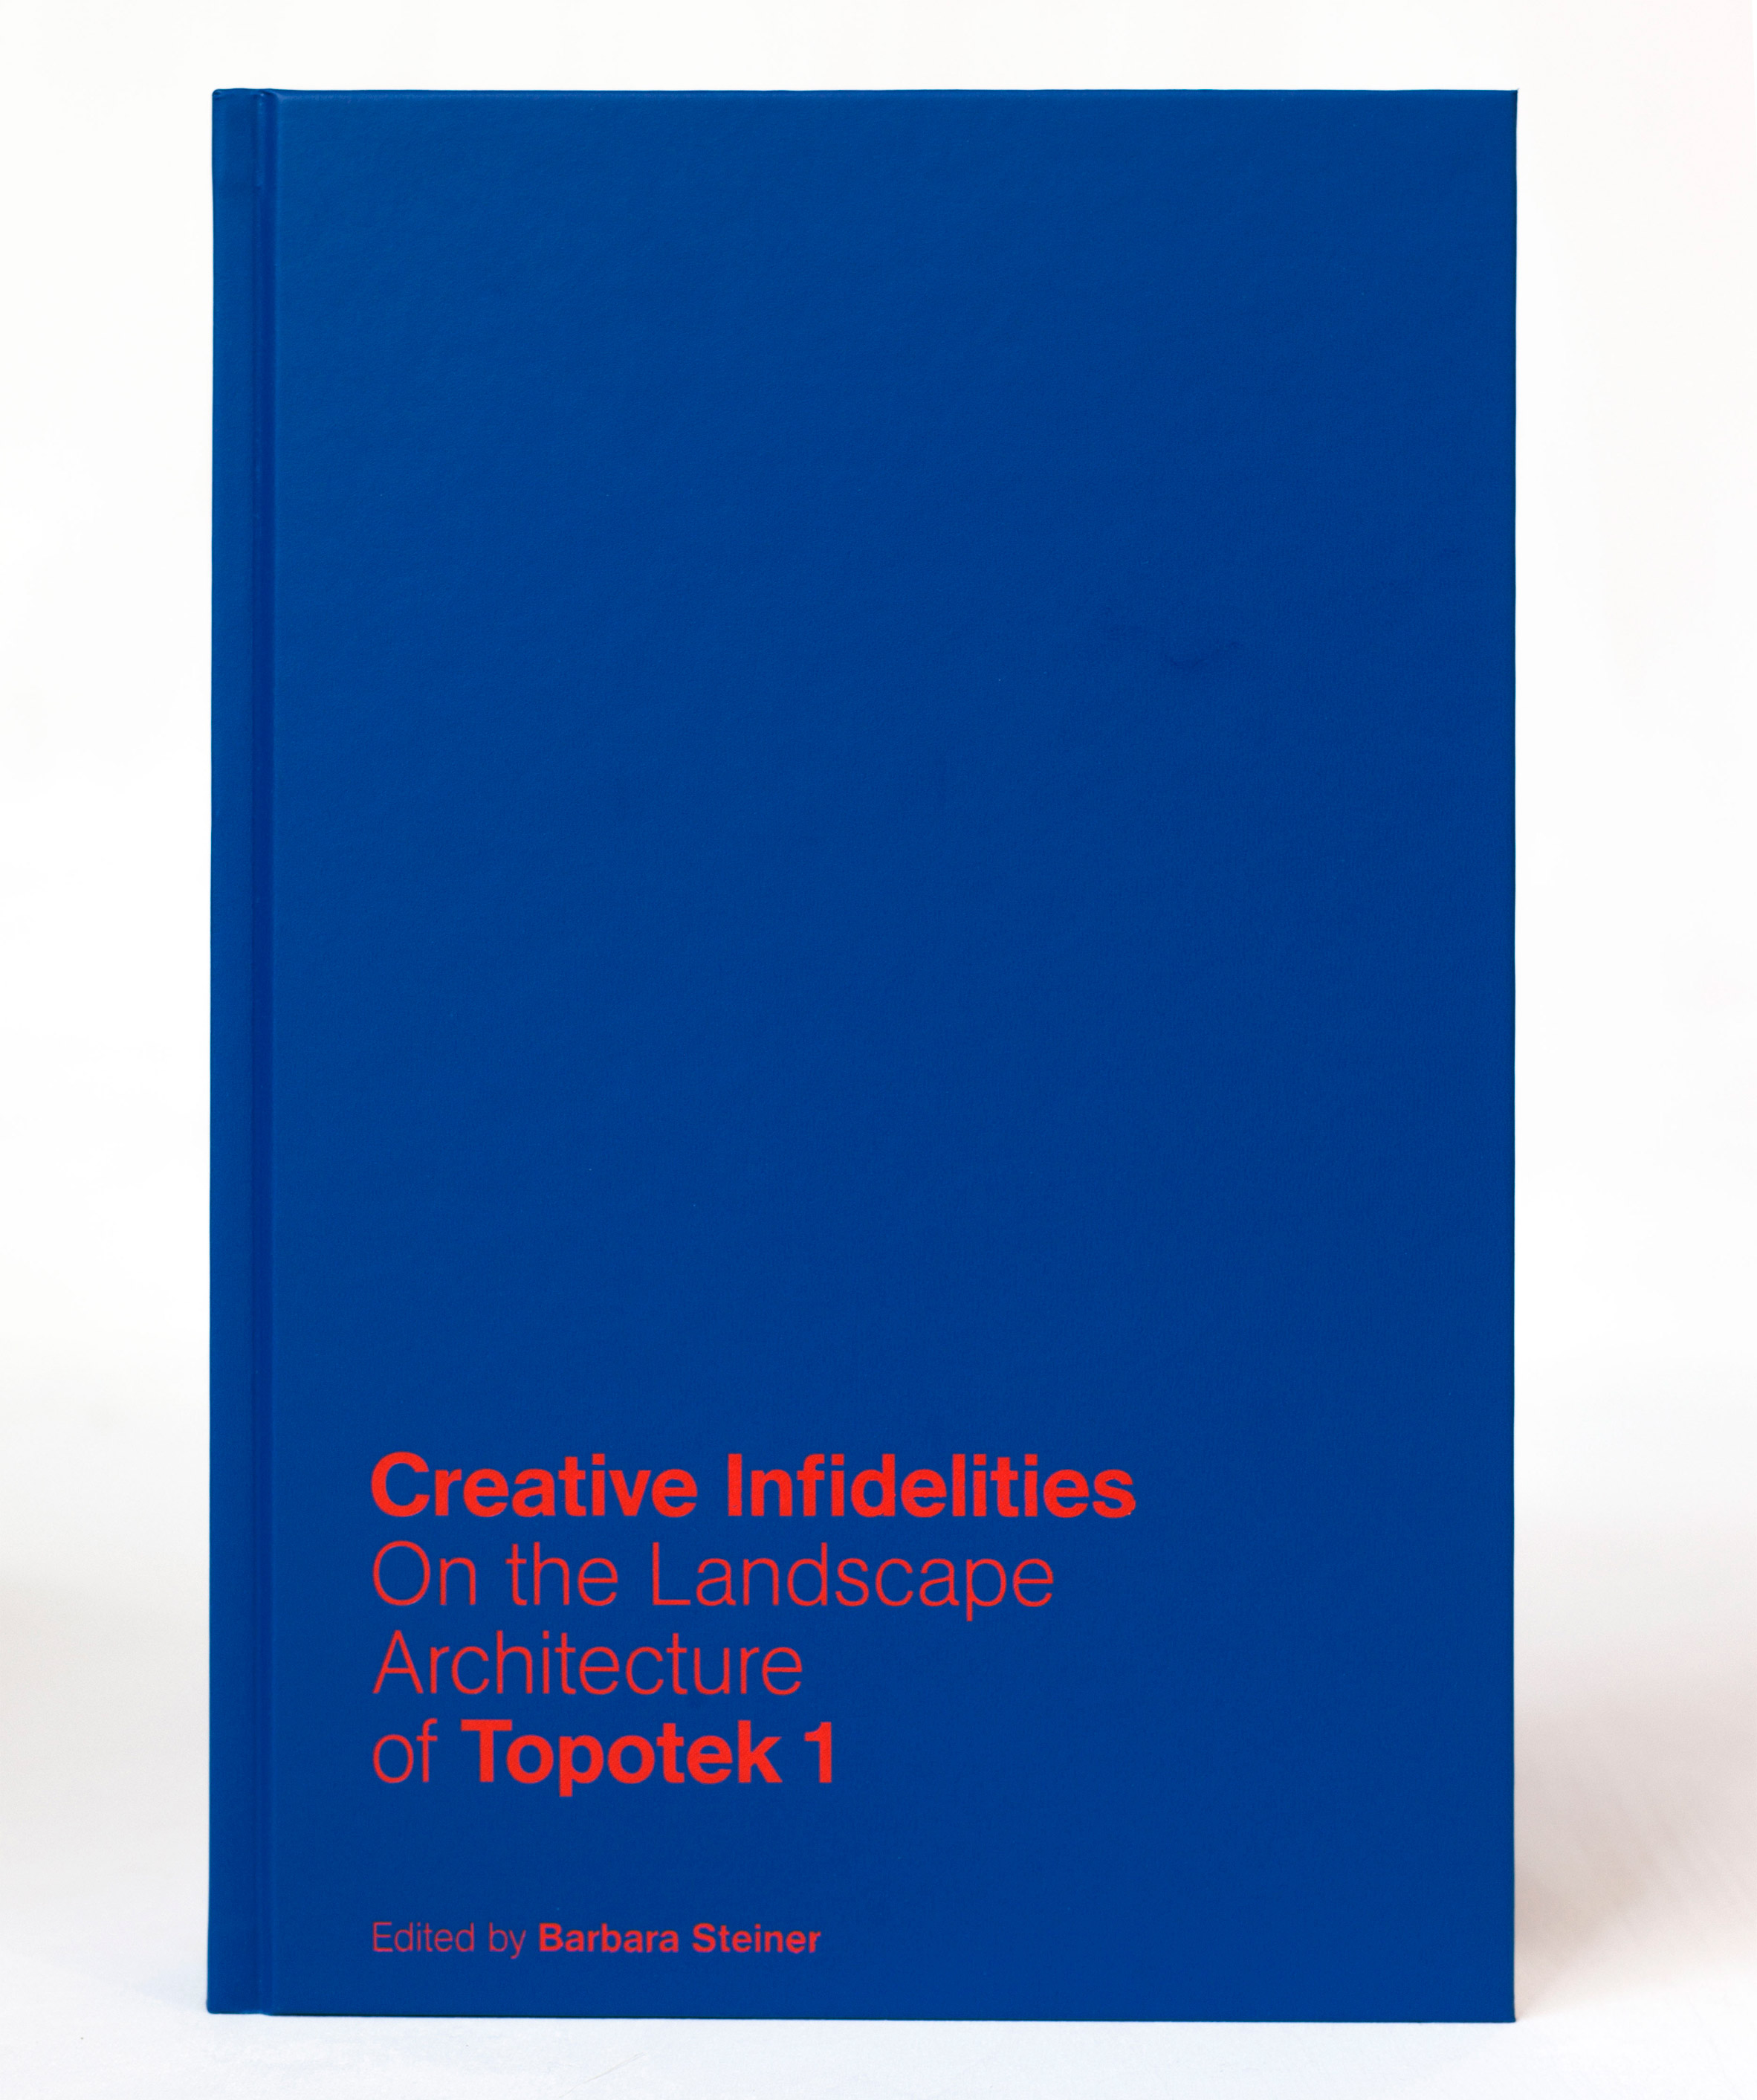 The Creative Infidelities of the Landscape Architecture of Topotek 1